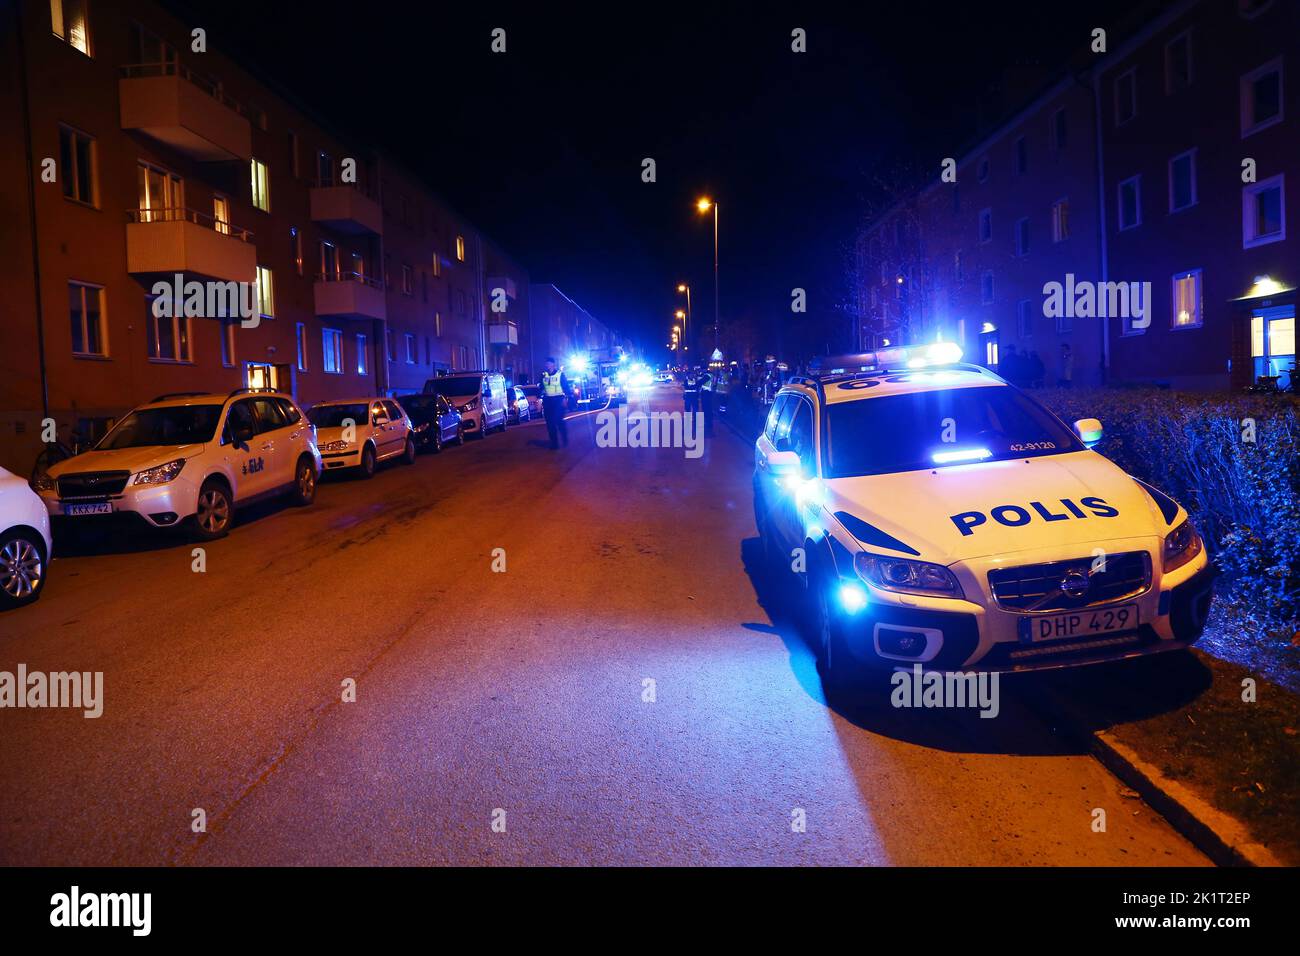 A police car with blue lights on. Stock Photo